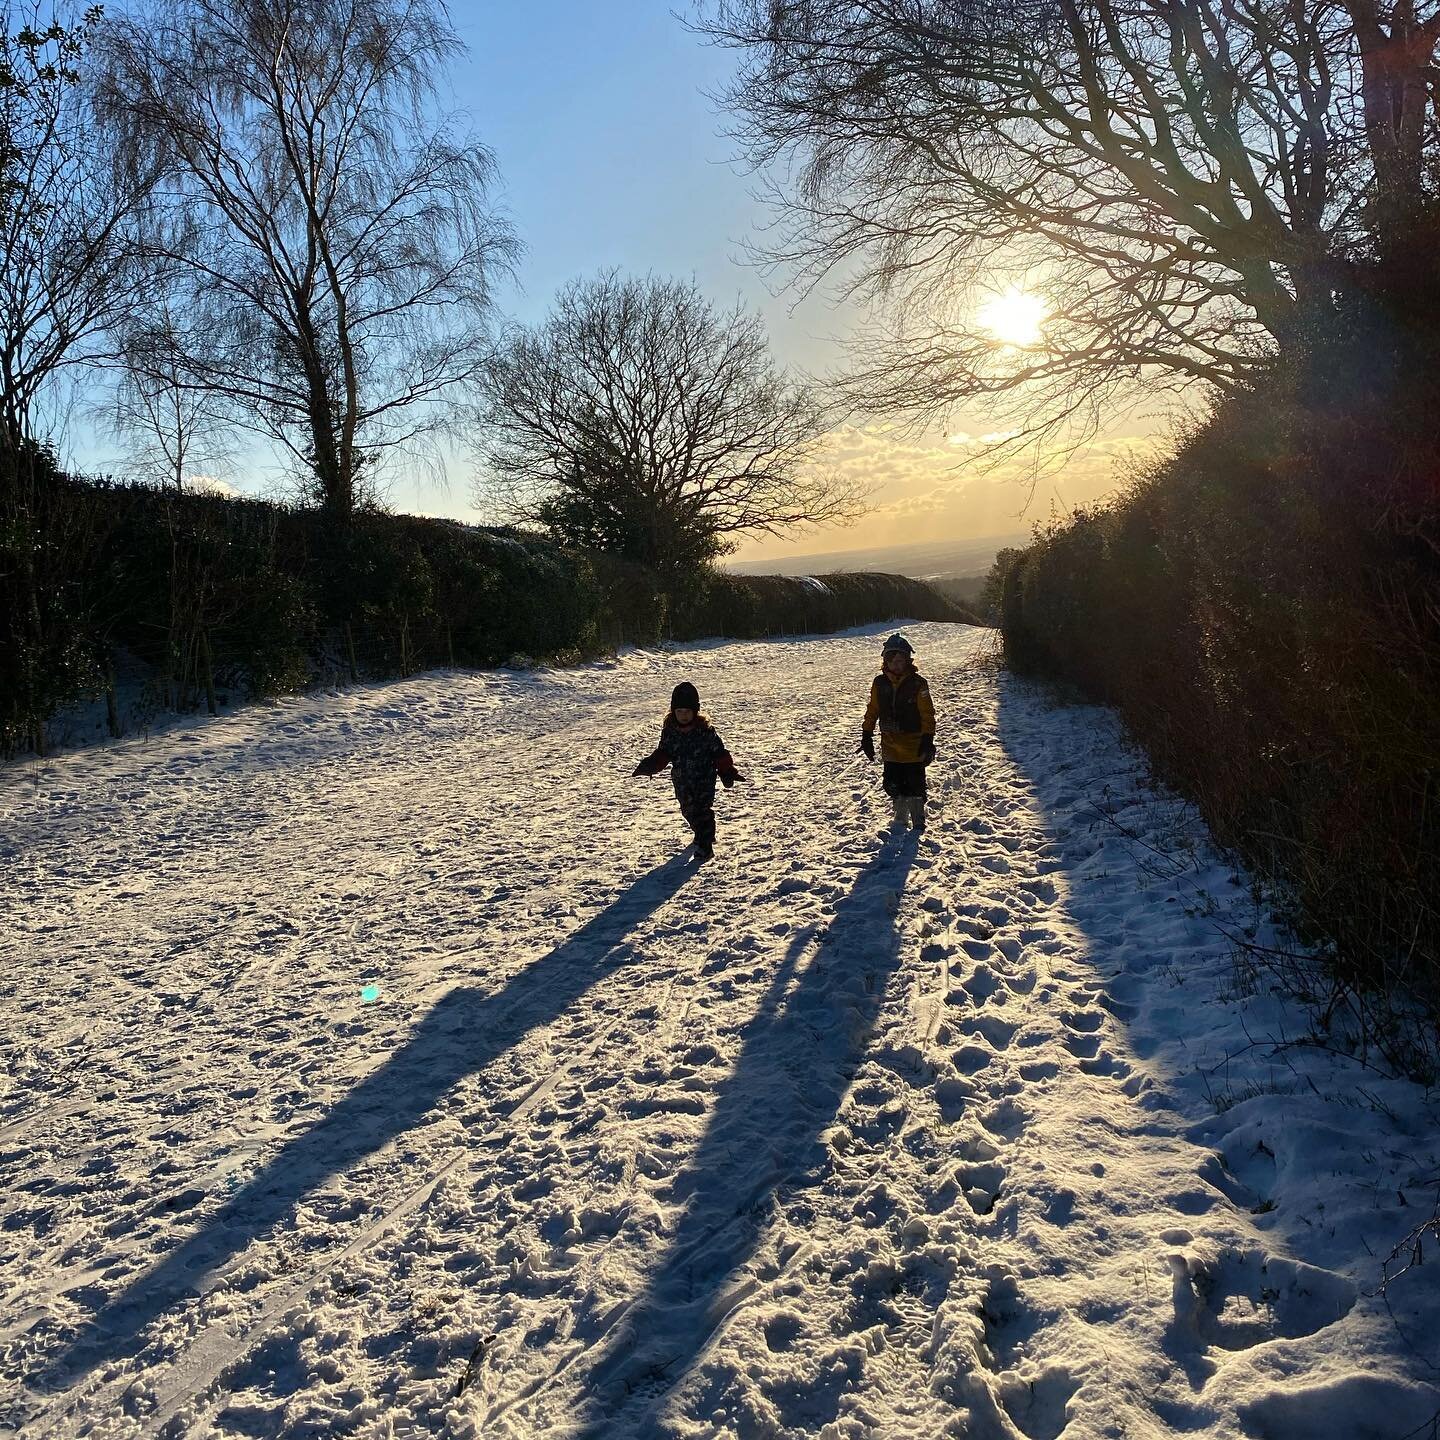 Taken at the end of a brilliant, soul-boosting afternoon of sledging ❄️❤️❄️
.
Idyllic, isn&rsquo;t it? But, in the interest of focusing on the realities of family travel, let&rsquo;s note that this pic is only idyllic because you can&rsquo;t hear the